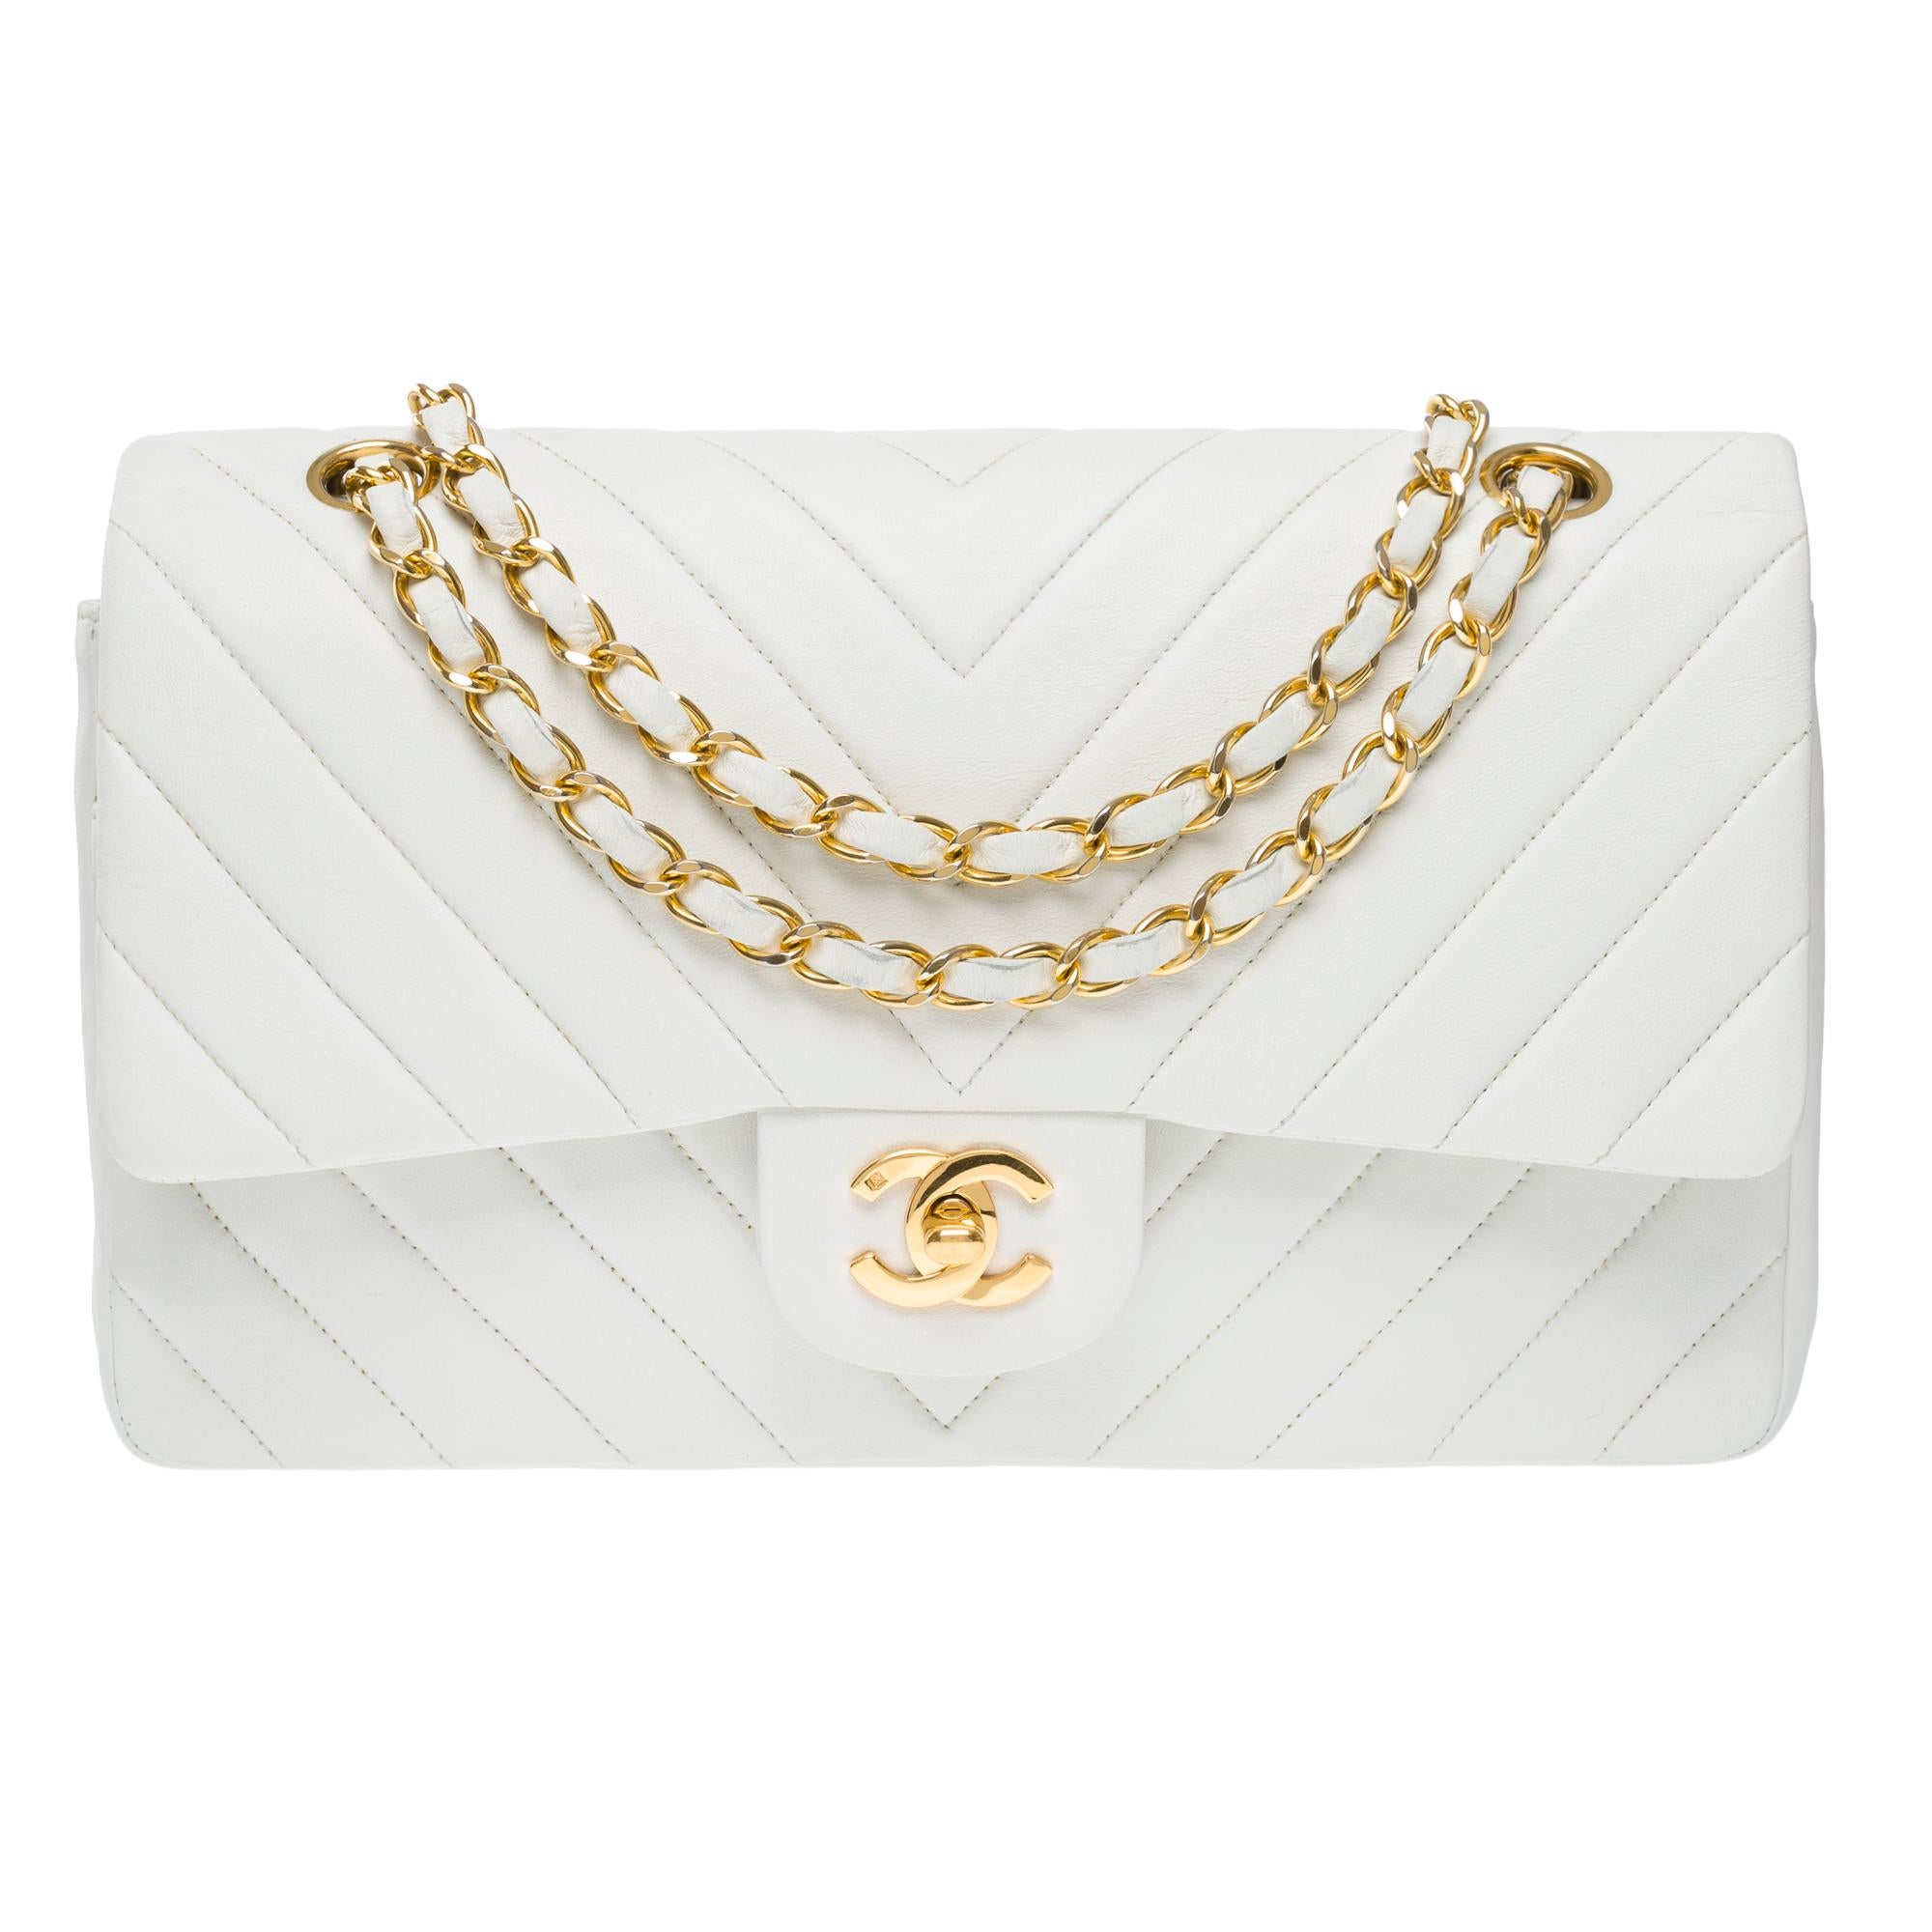 Gray Chanel Timeless double flap shoulder bag in white herringbone quilted lamb, GHW